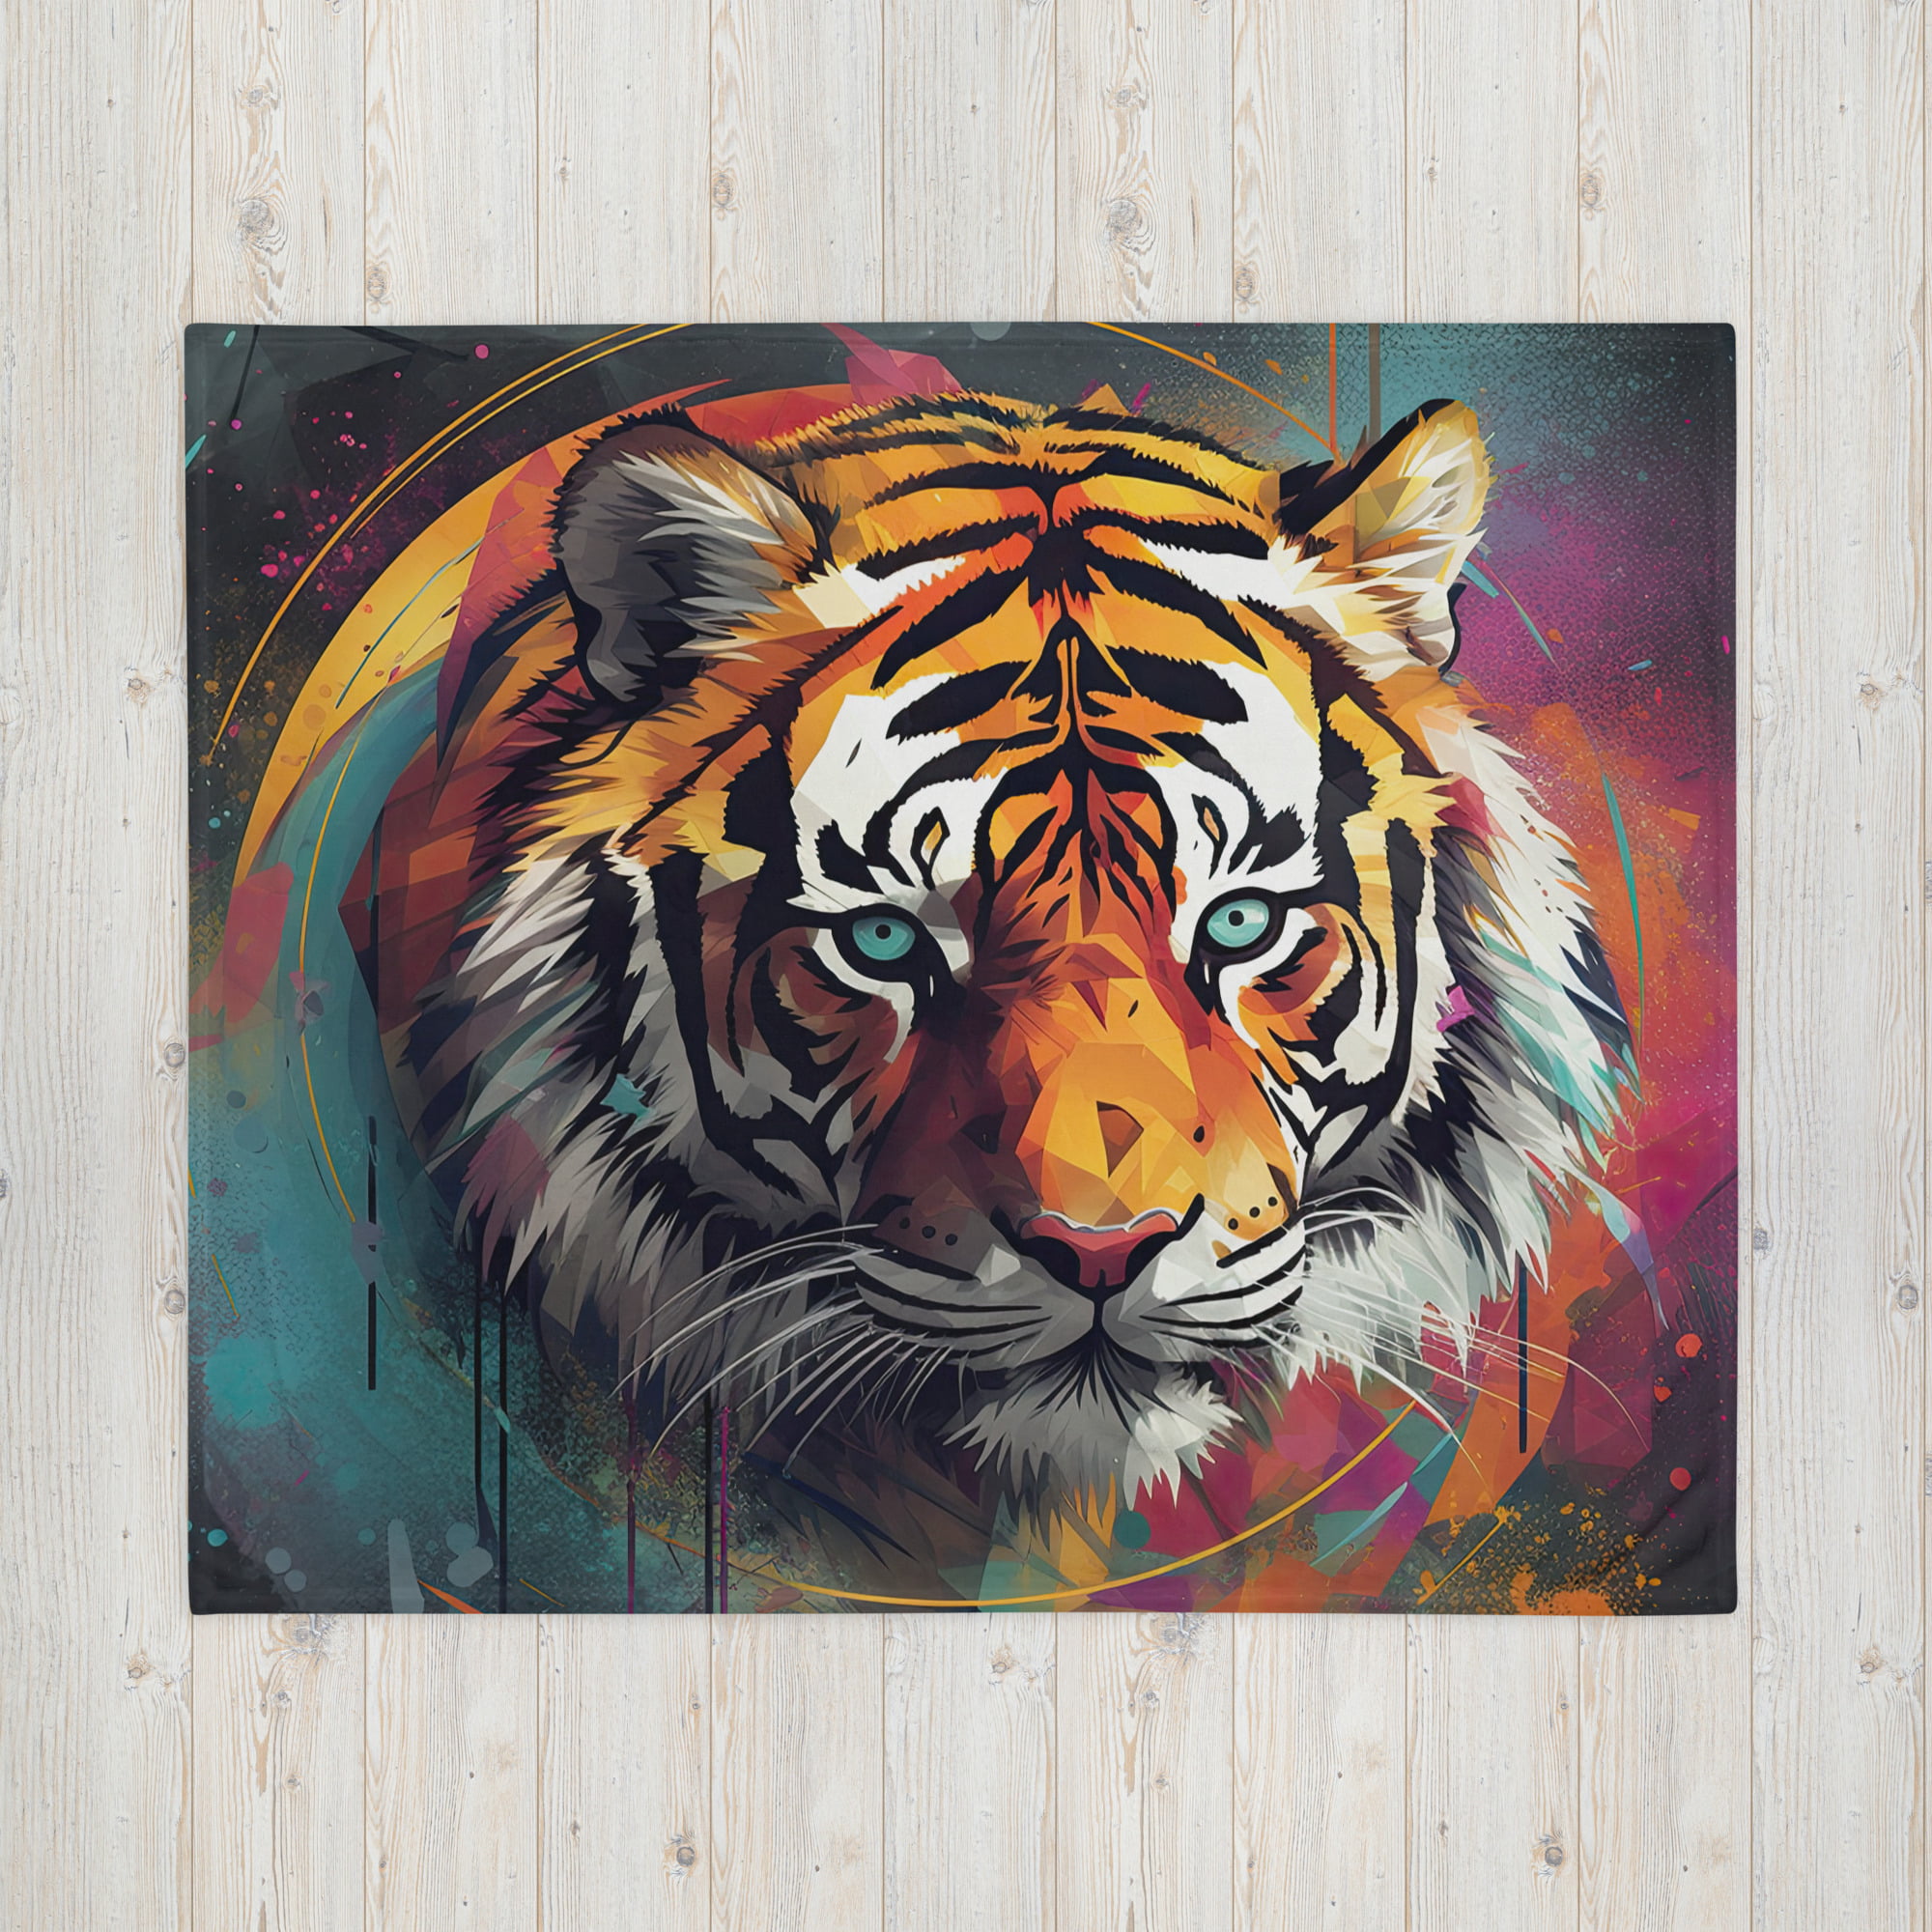 Abstract Tiger Art Throw Blanket – 50×60